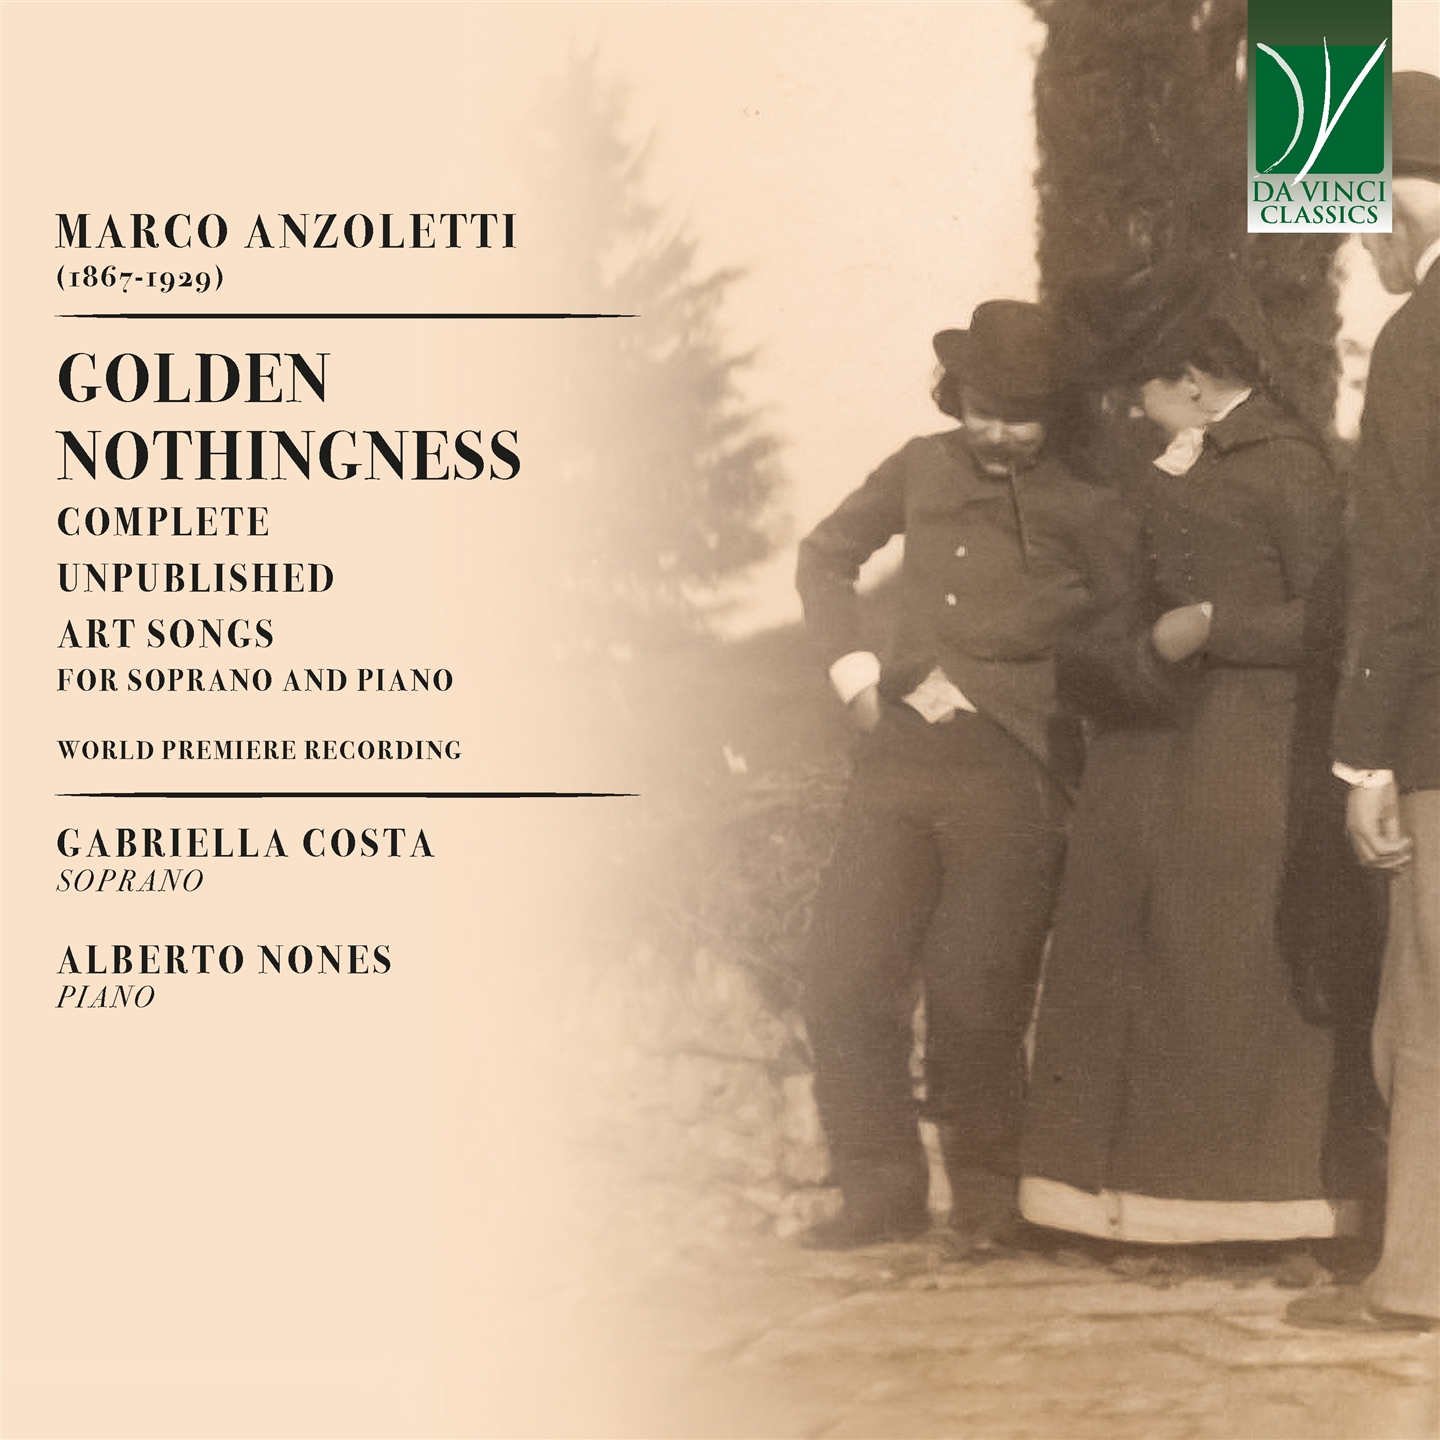 MARCO ANZOLETTI: GOLDEN NOTHINGNESS, COMPLETE UNPUBLISHED ART SONGS FOR SOPRANO